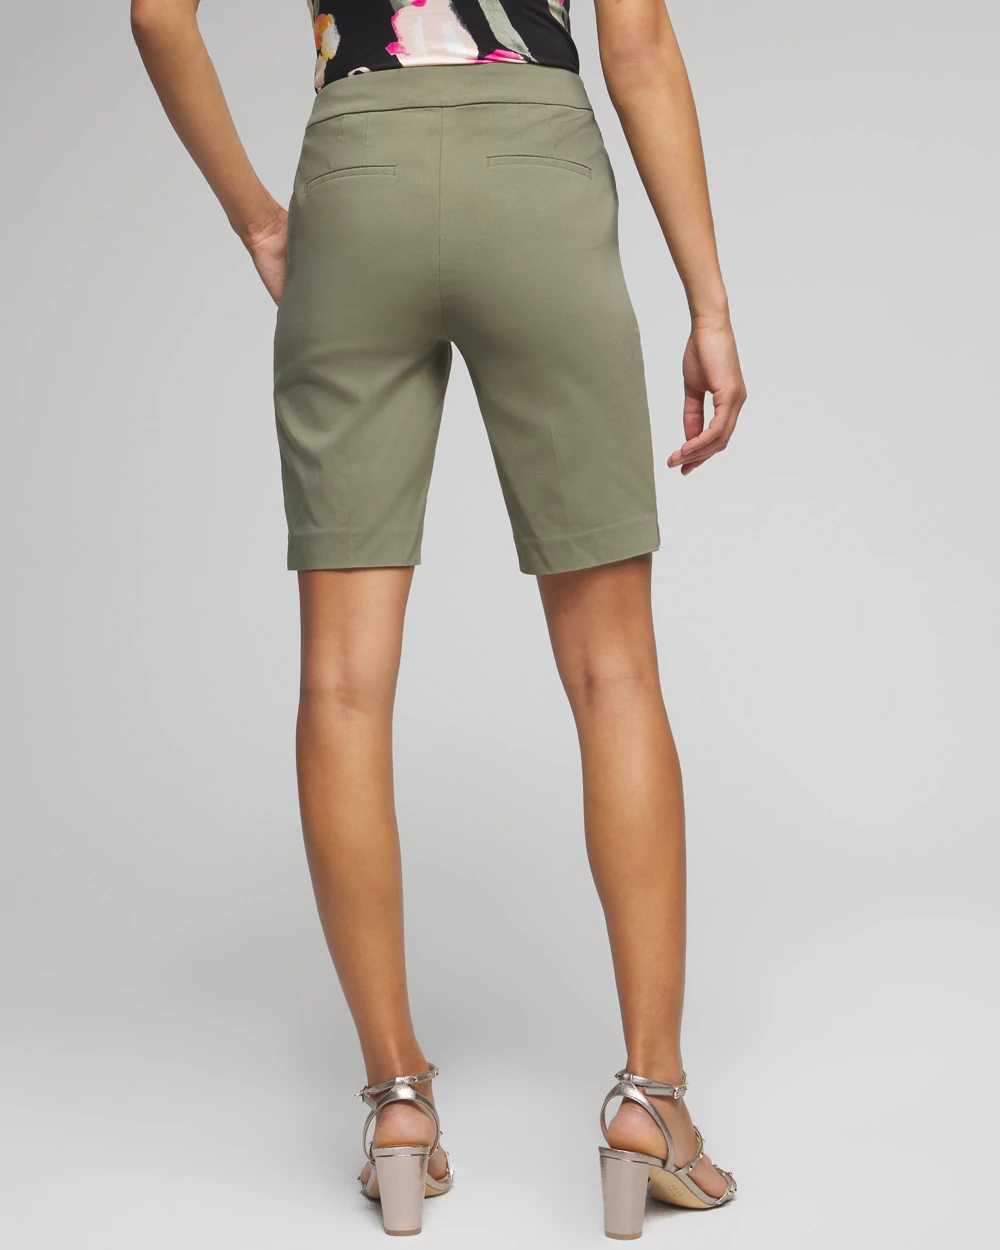 Outlet WHBM 10-Inch Bermuda Shorts click to view larger image.